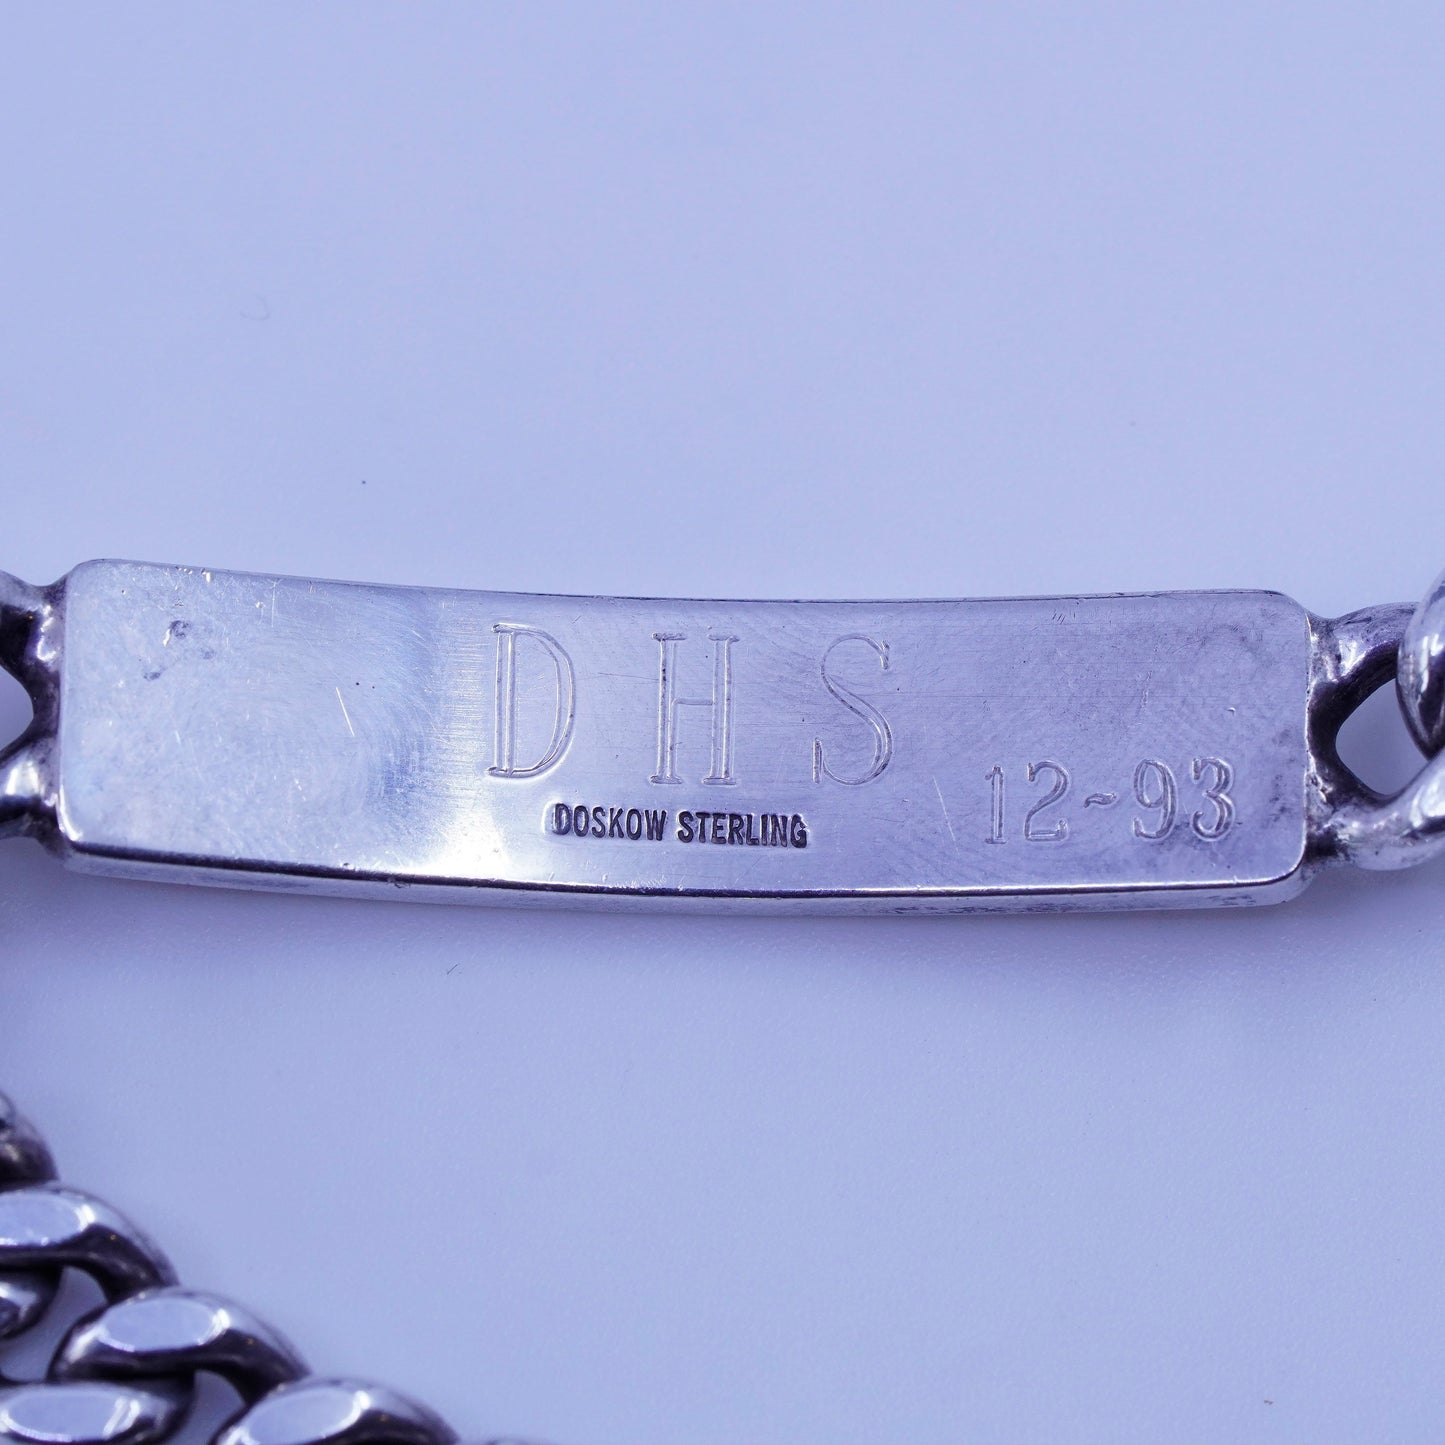 7.5”, doskow Sterling silver bracelet, 925 curb chain name tag engraved “FES”